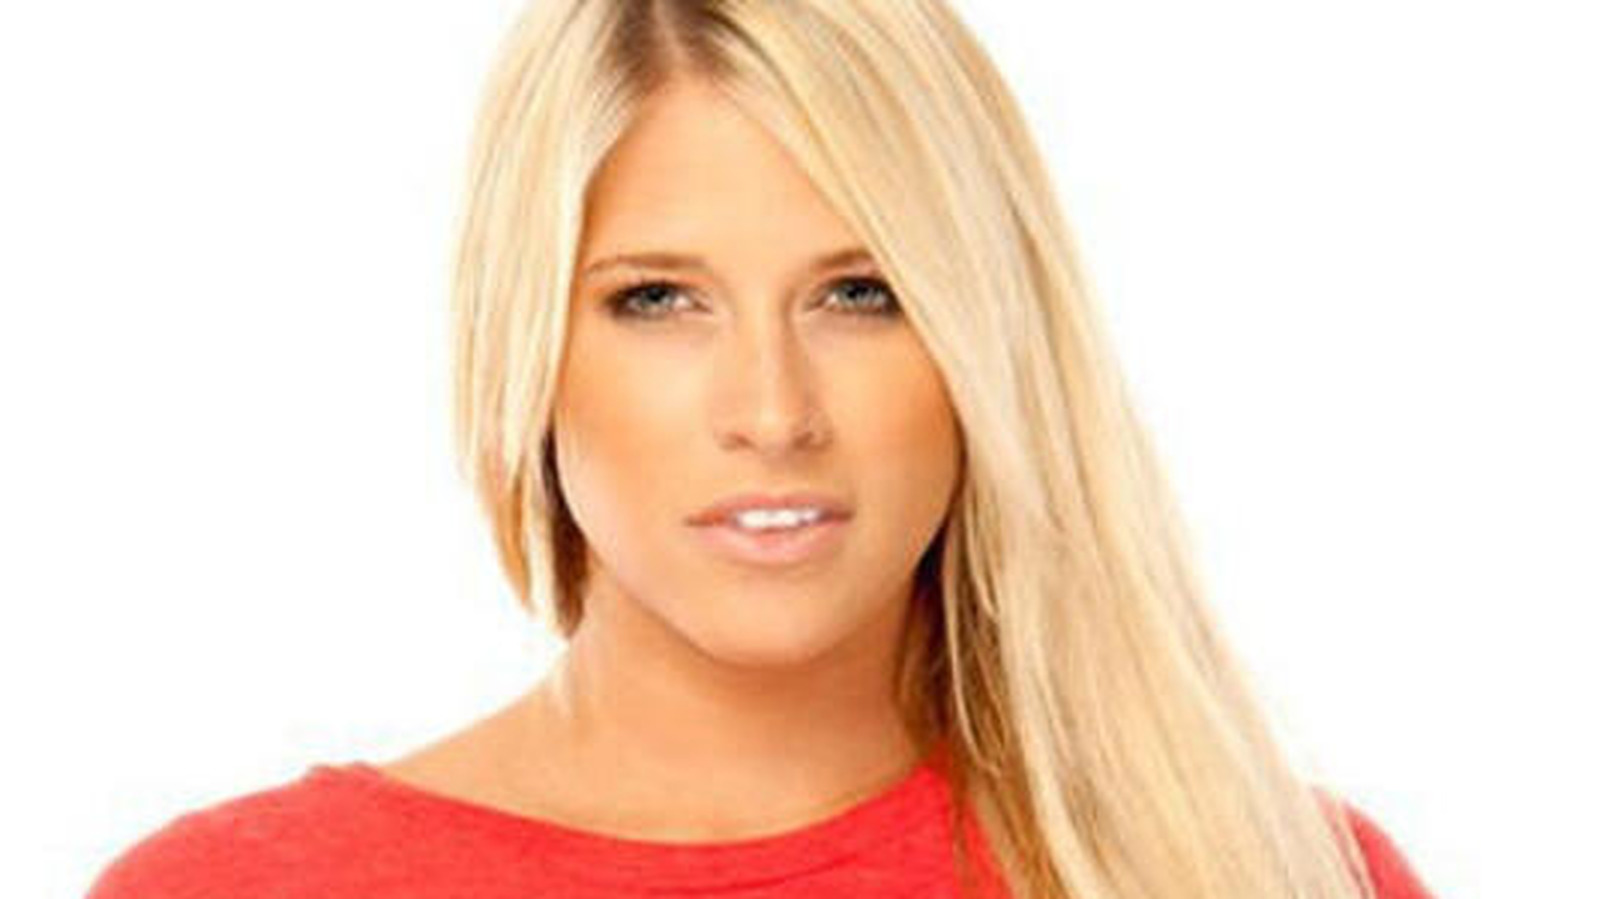 Former WWE Star Kelly Kelly Pregnant With Her First Child, Will Attend WrestleMania